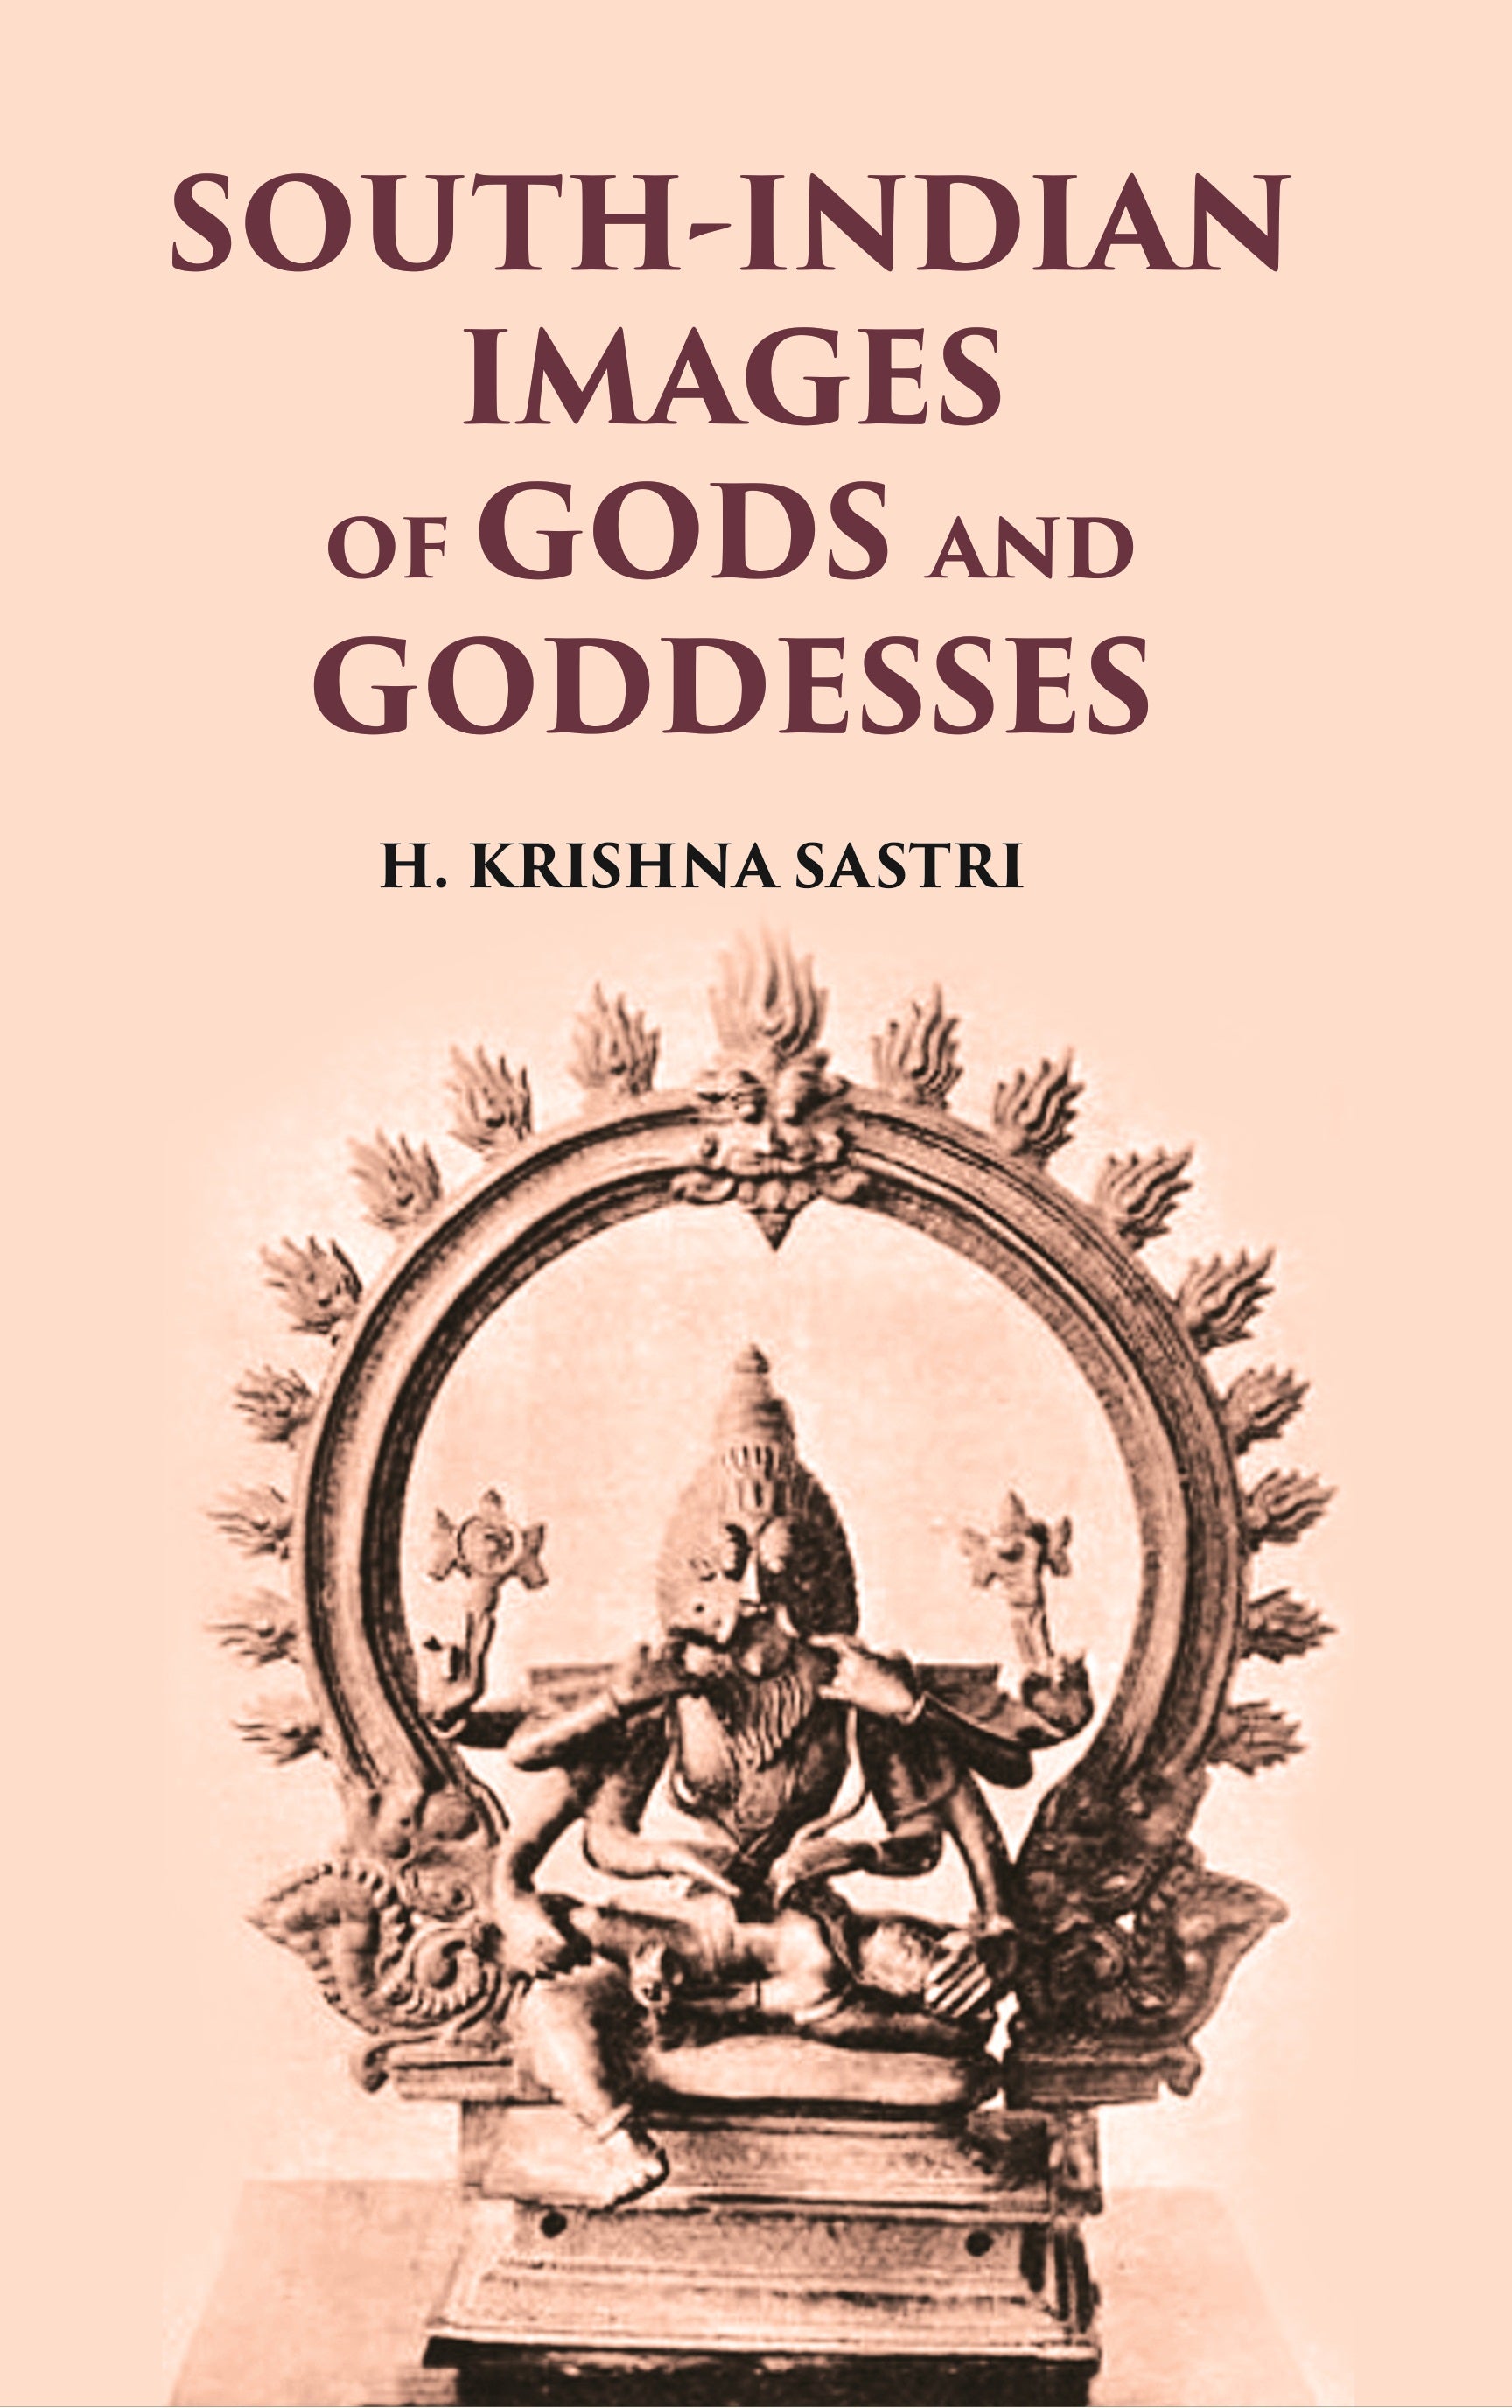 SOUTH-INDIAN IMAGES OF GODS AND GODDESSES